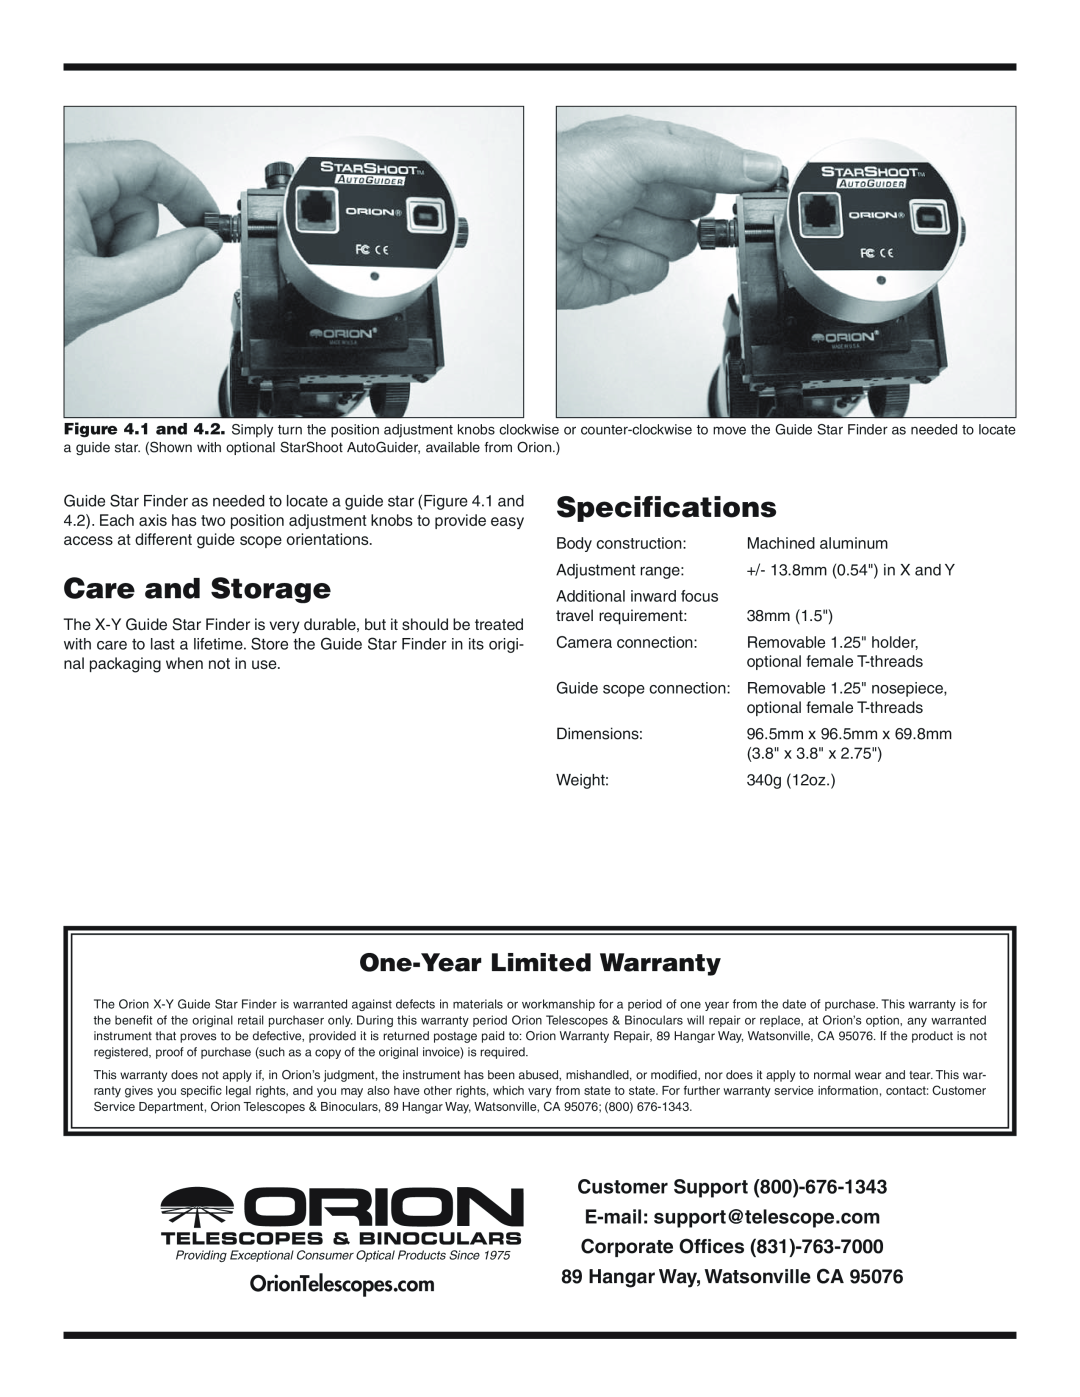 Orion #52061 Care and Storage, Specifications, One-YearLimited Warranty, OrionTelescopes.com, E-mail support@telescope.com 